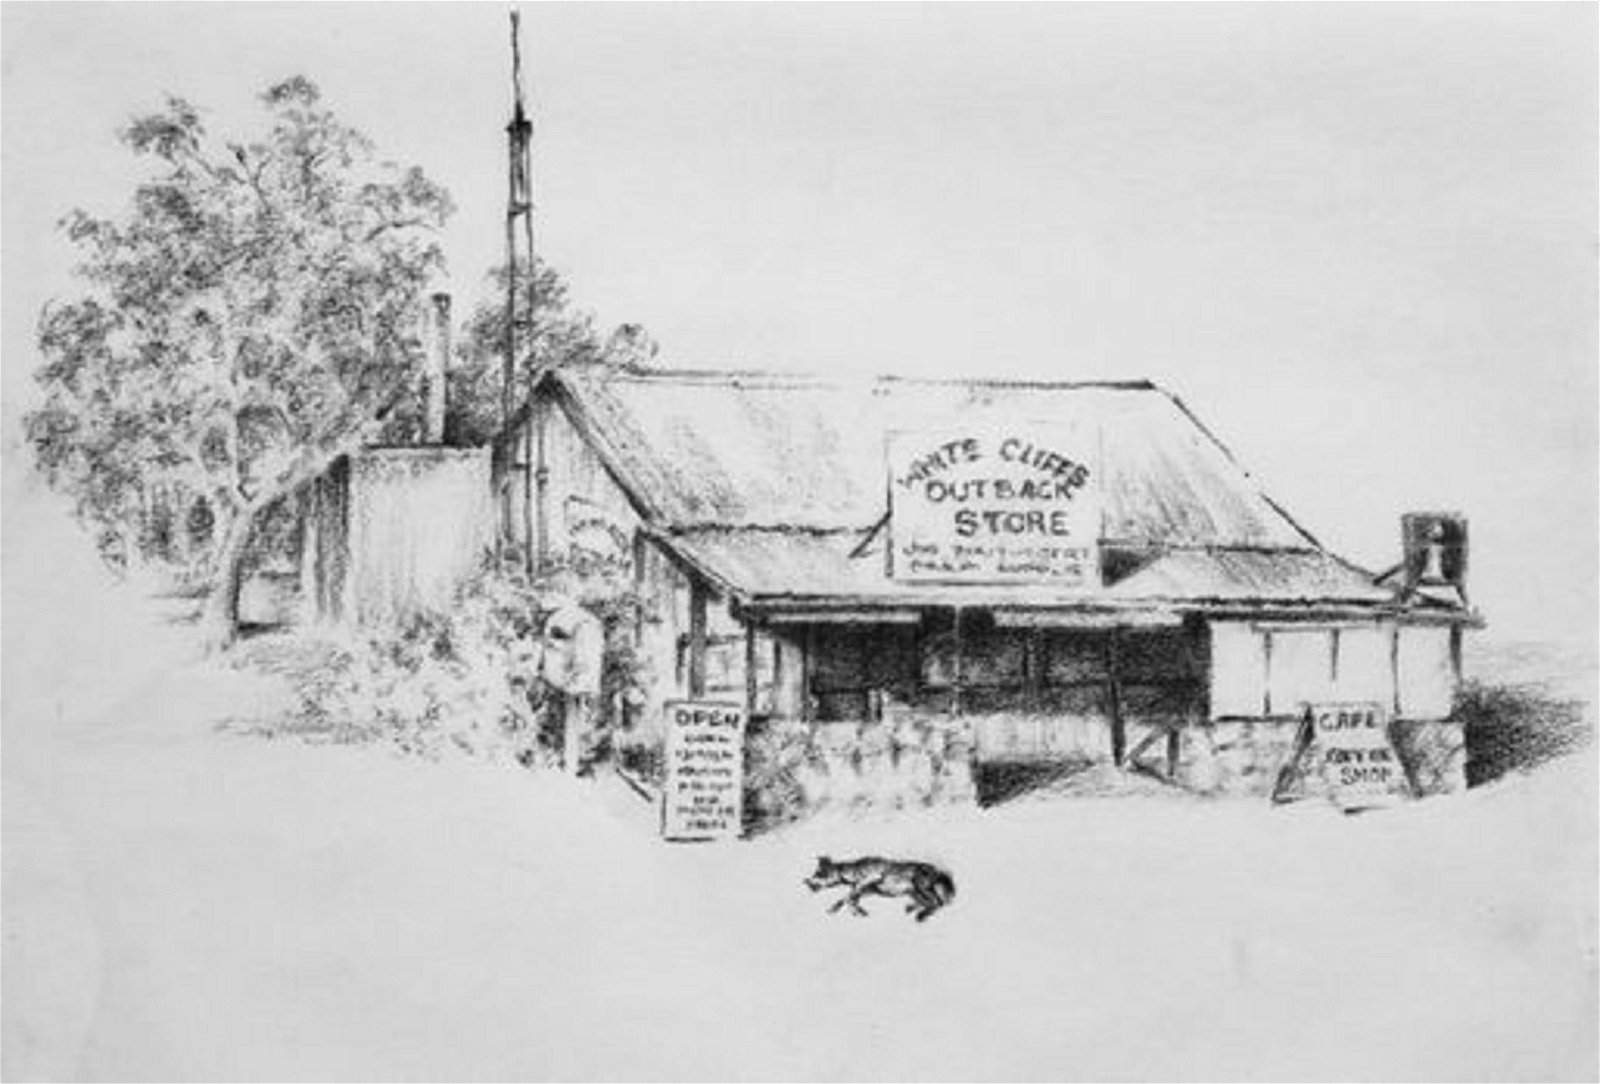 White Cliffs Outback Store - Broome Tourism